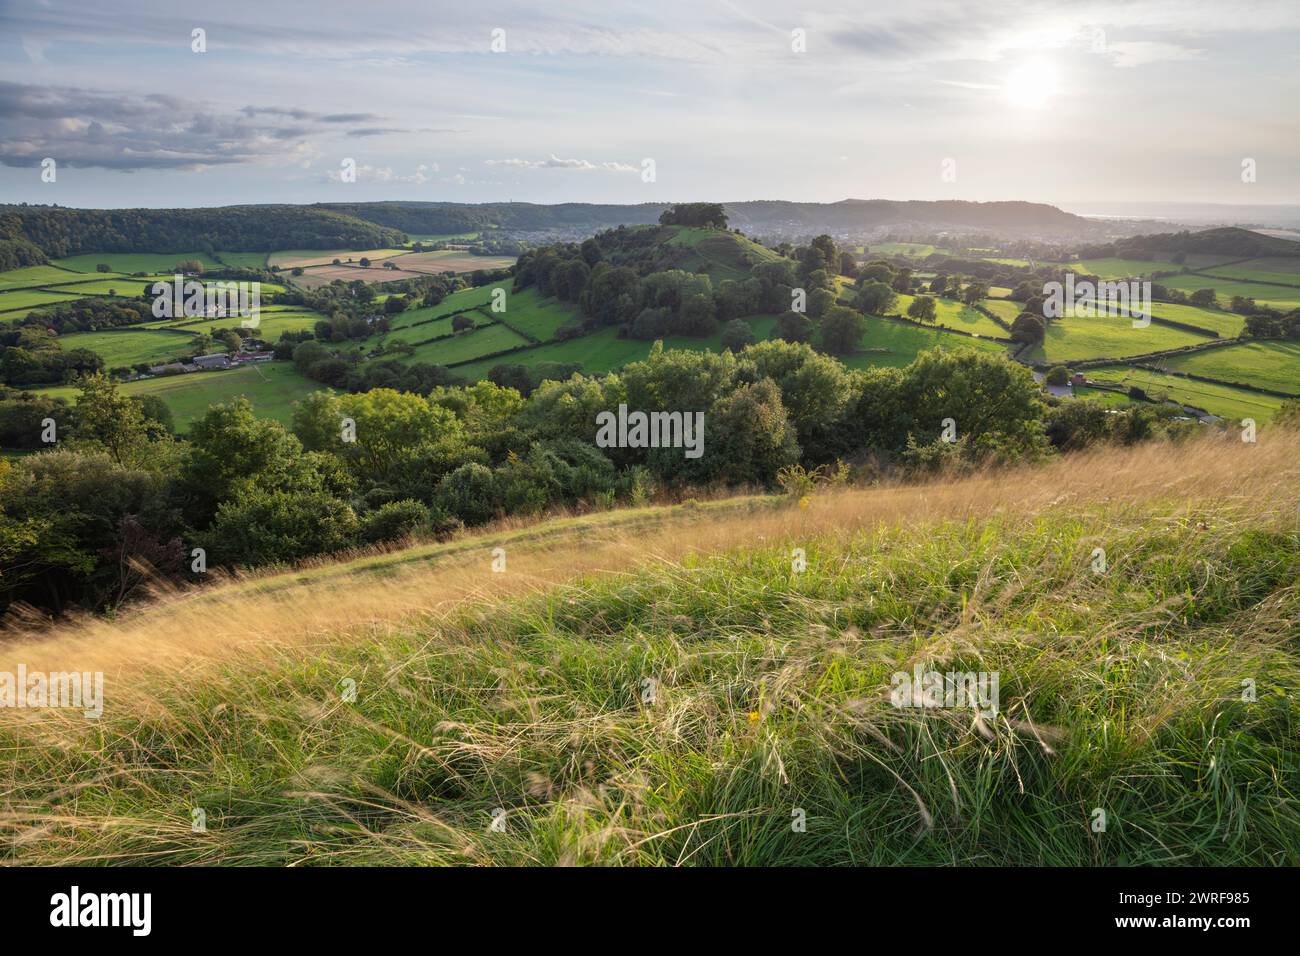 View to Dursley and Downham Hill from Uley Bury Hillfort, Dursley, Cotswolds, Gloucestershire, England, United Kingdom, Europe Stock Photo